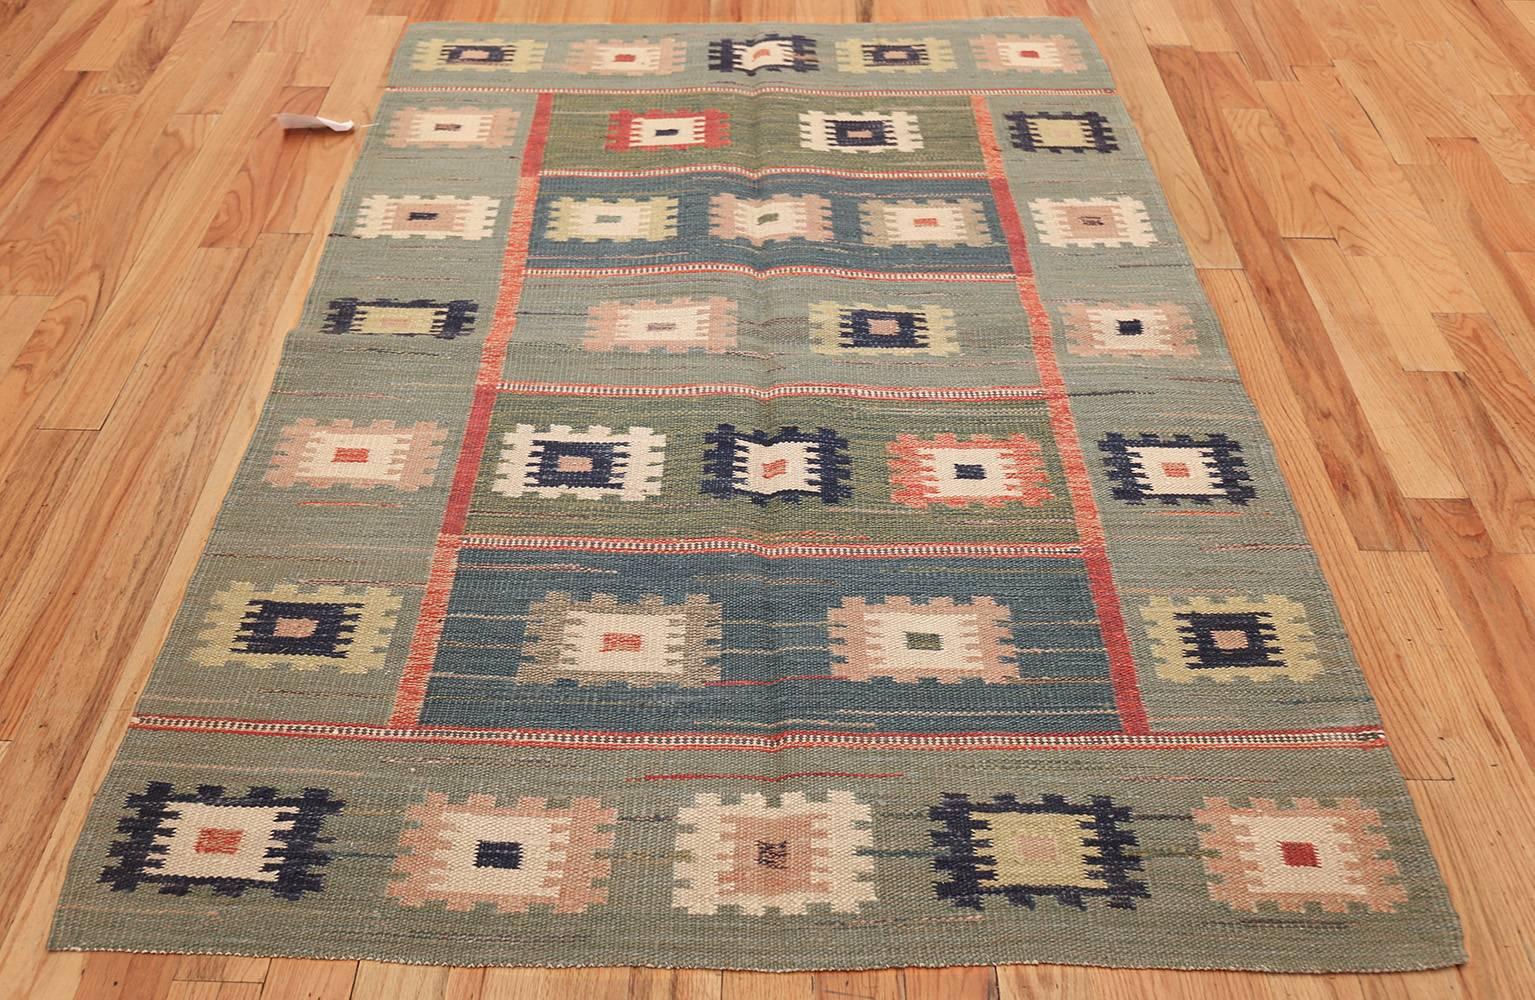 Hand-Woven Vintage Inspired Swedish Scandinavian Kilim Rug. Size: 4 ft 4 in x 6 ft 3 in